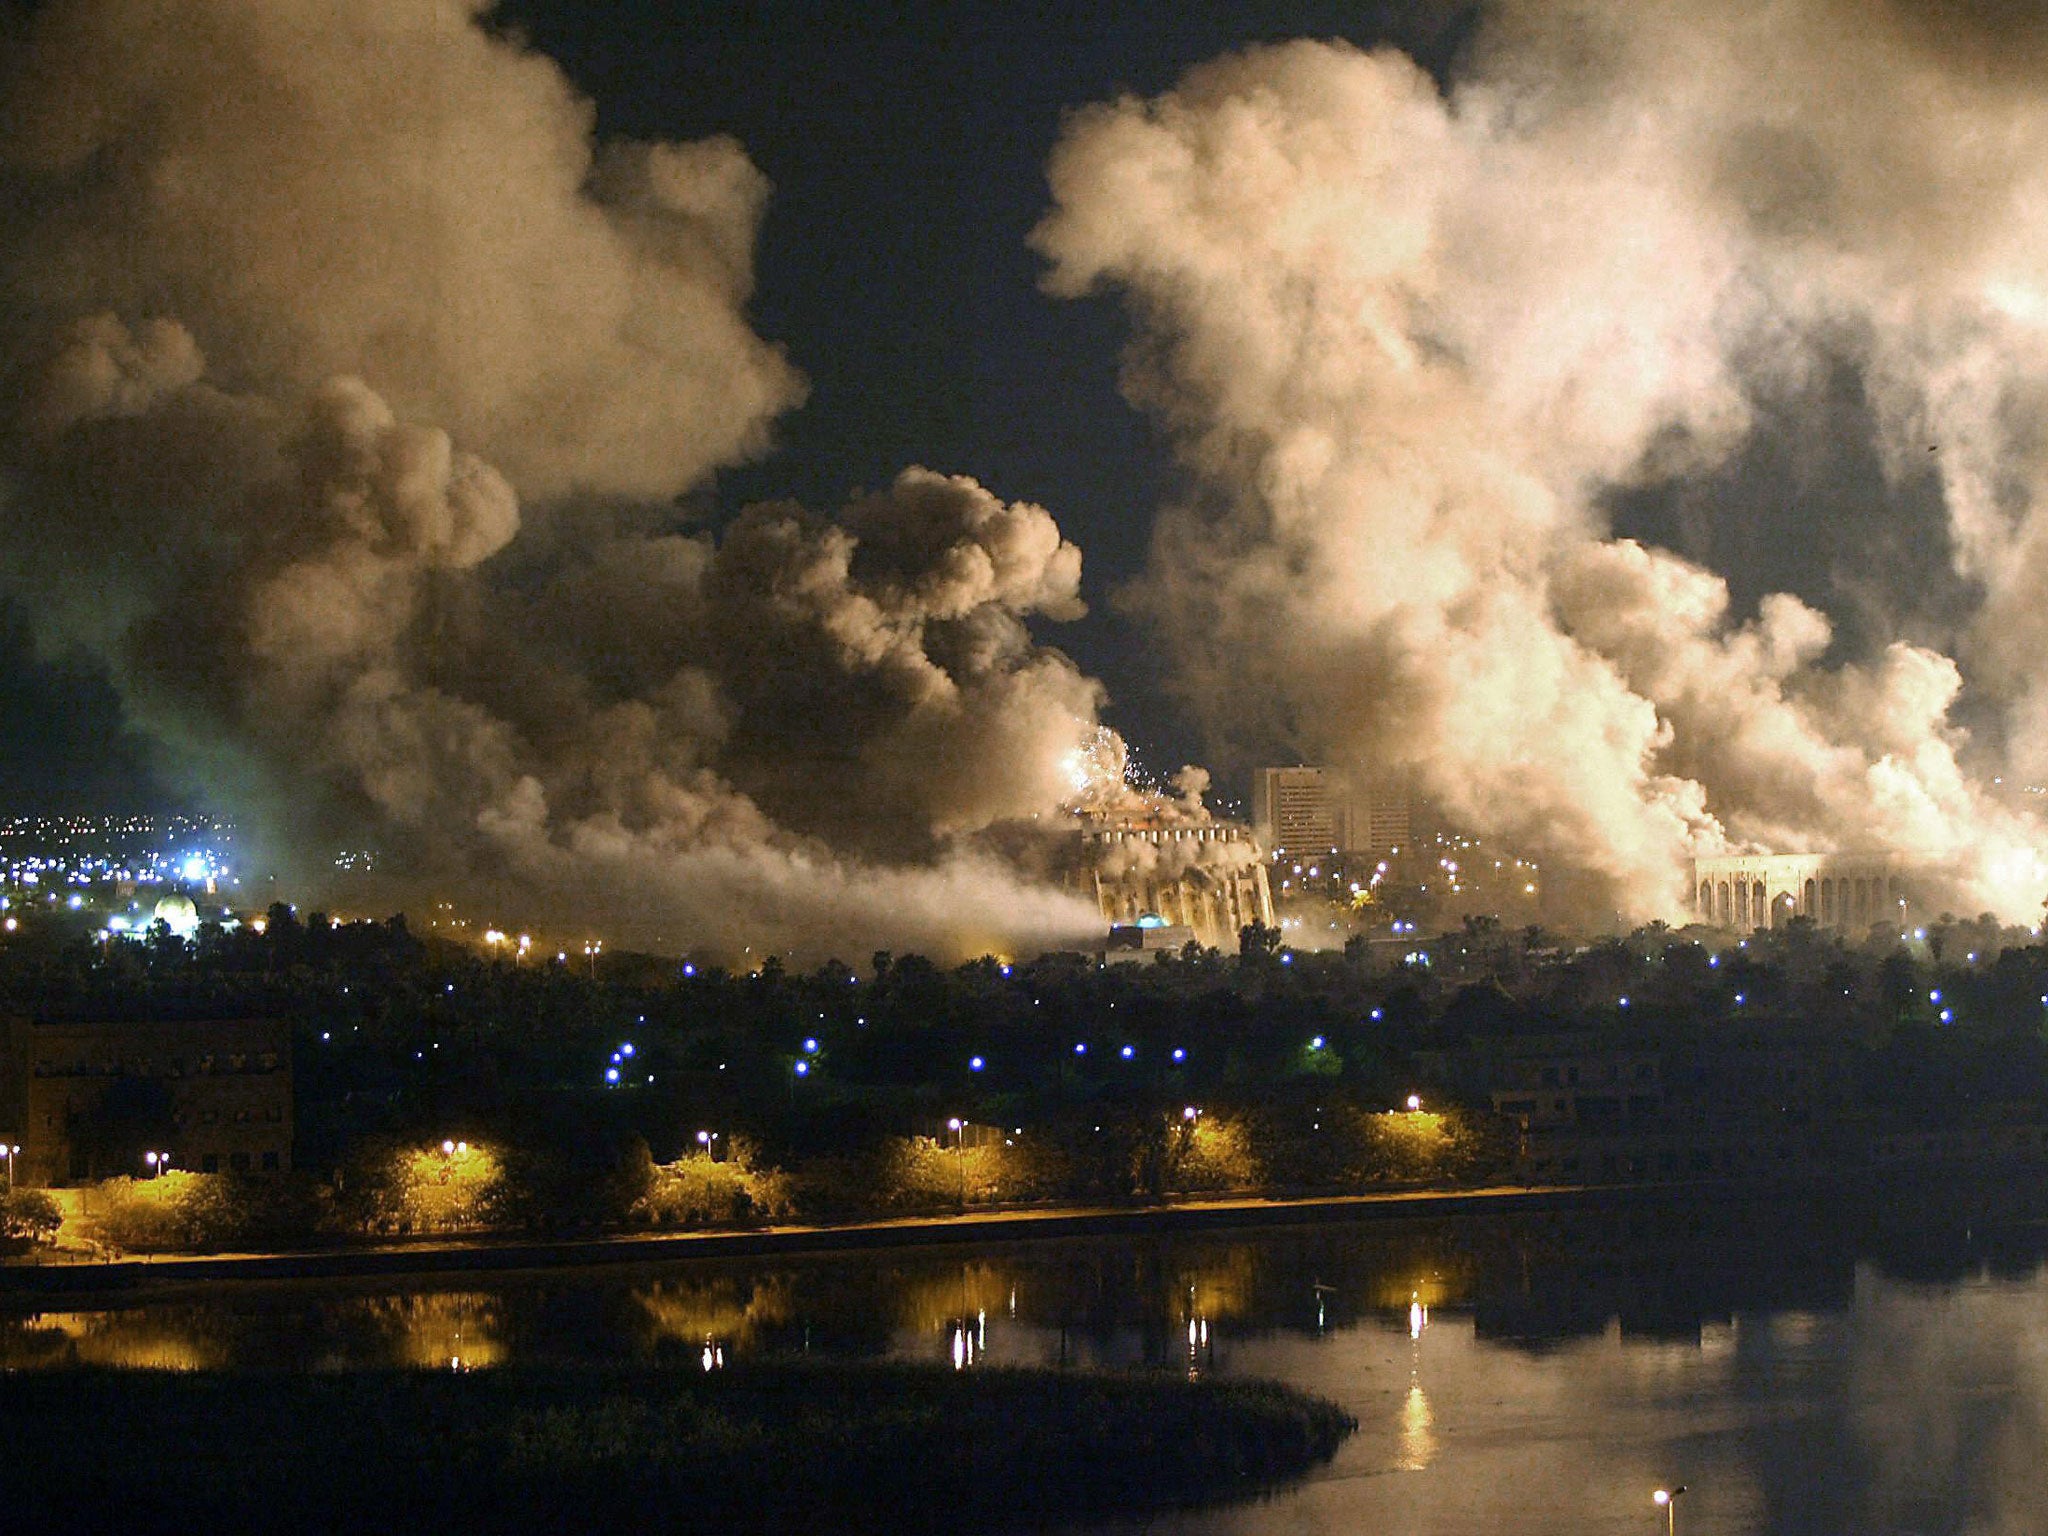 Shock and awe: The US-led raid on Baghdad on 21 March 2003 that launched the Iraq war